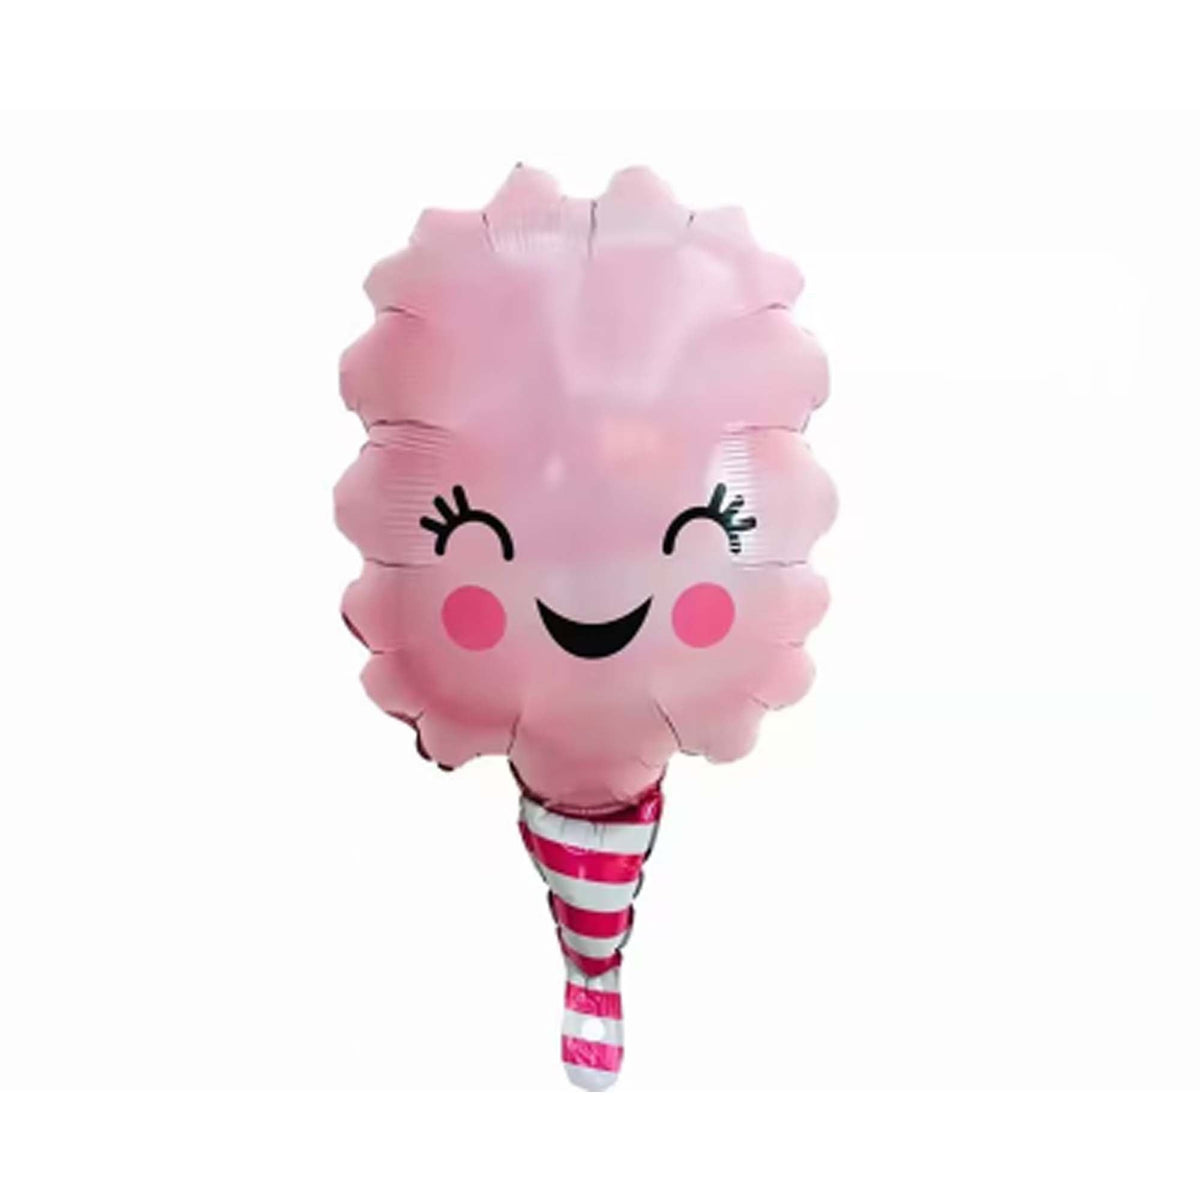 BOOMBA INTERNATIONAL TRADING CO,. LTD Balloons Cotton Candy Supershape Balloon, 27 Inches, 1 Count